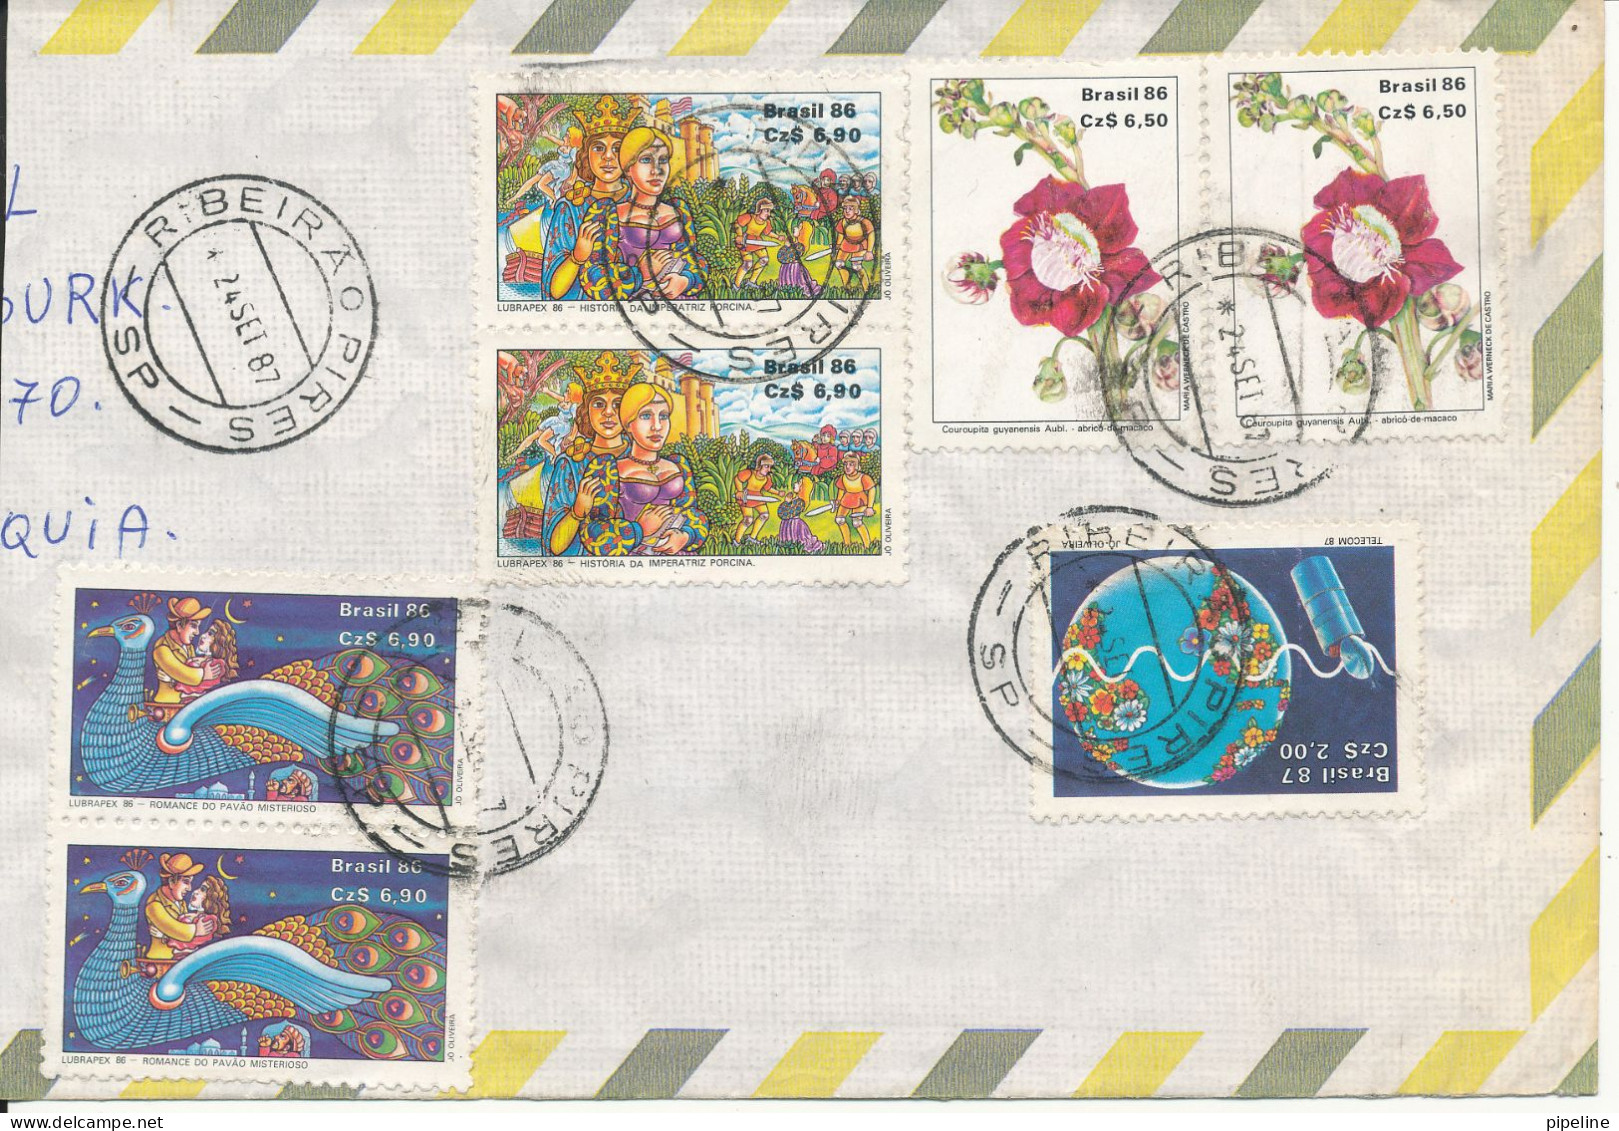 Brazil Air Mail Cover Sent To Czechoslovakia 24-9-1987 With A Lot Of Stamps (the Cover Is Cut In The Left Side) - Poste Aérienne